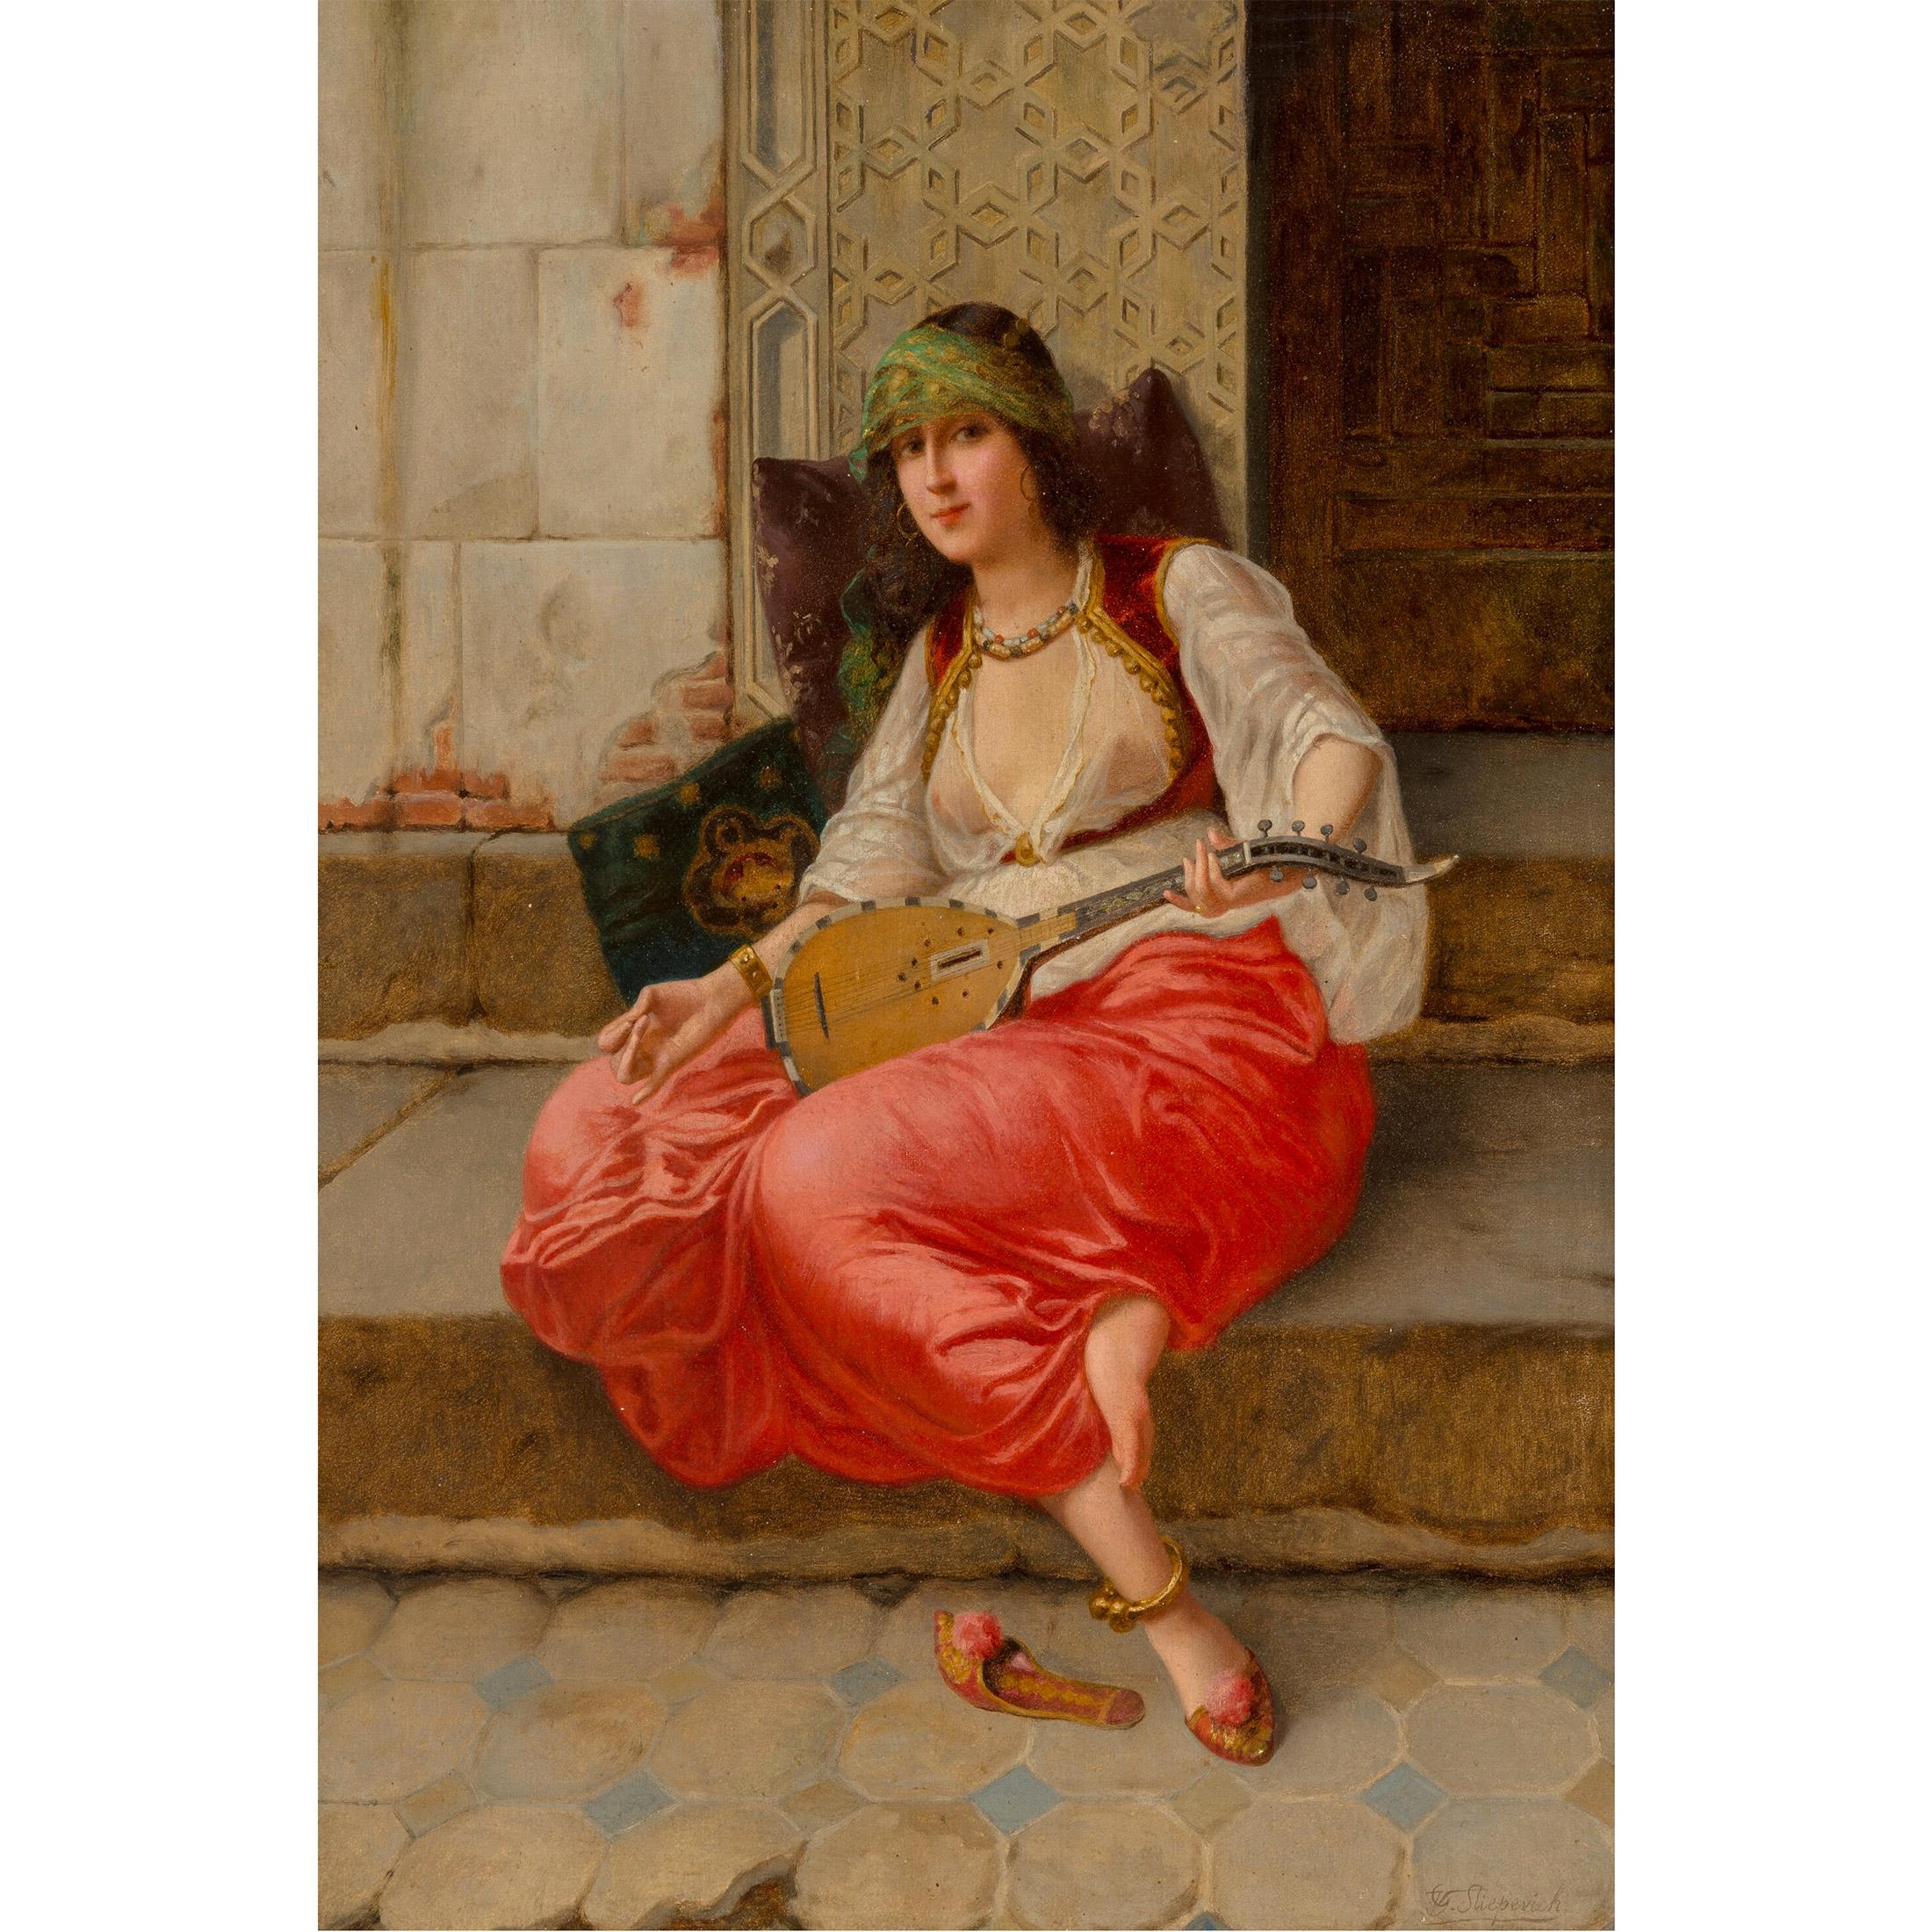 A Fine Stiepevich Orientalist Painting of a Harem Girl with a Lute